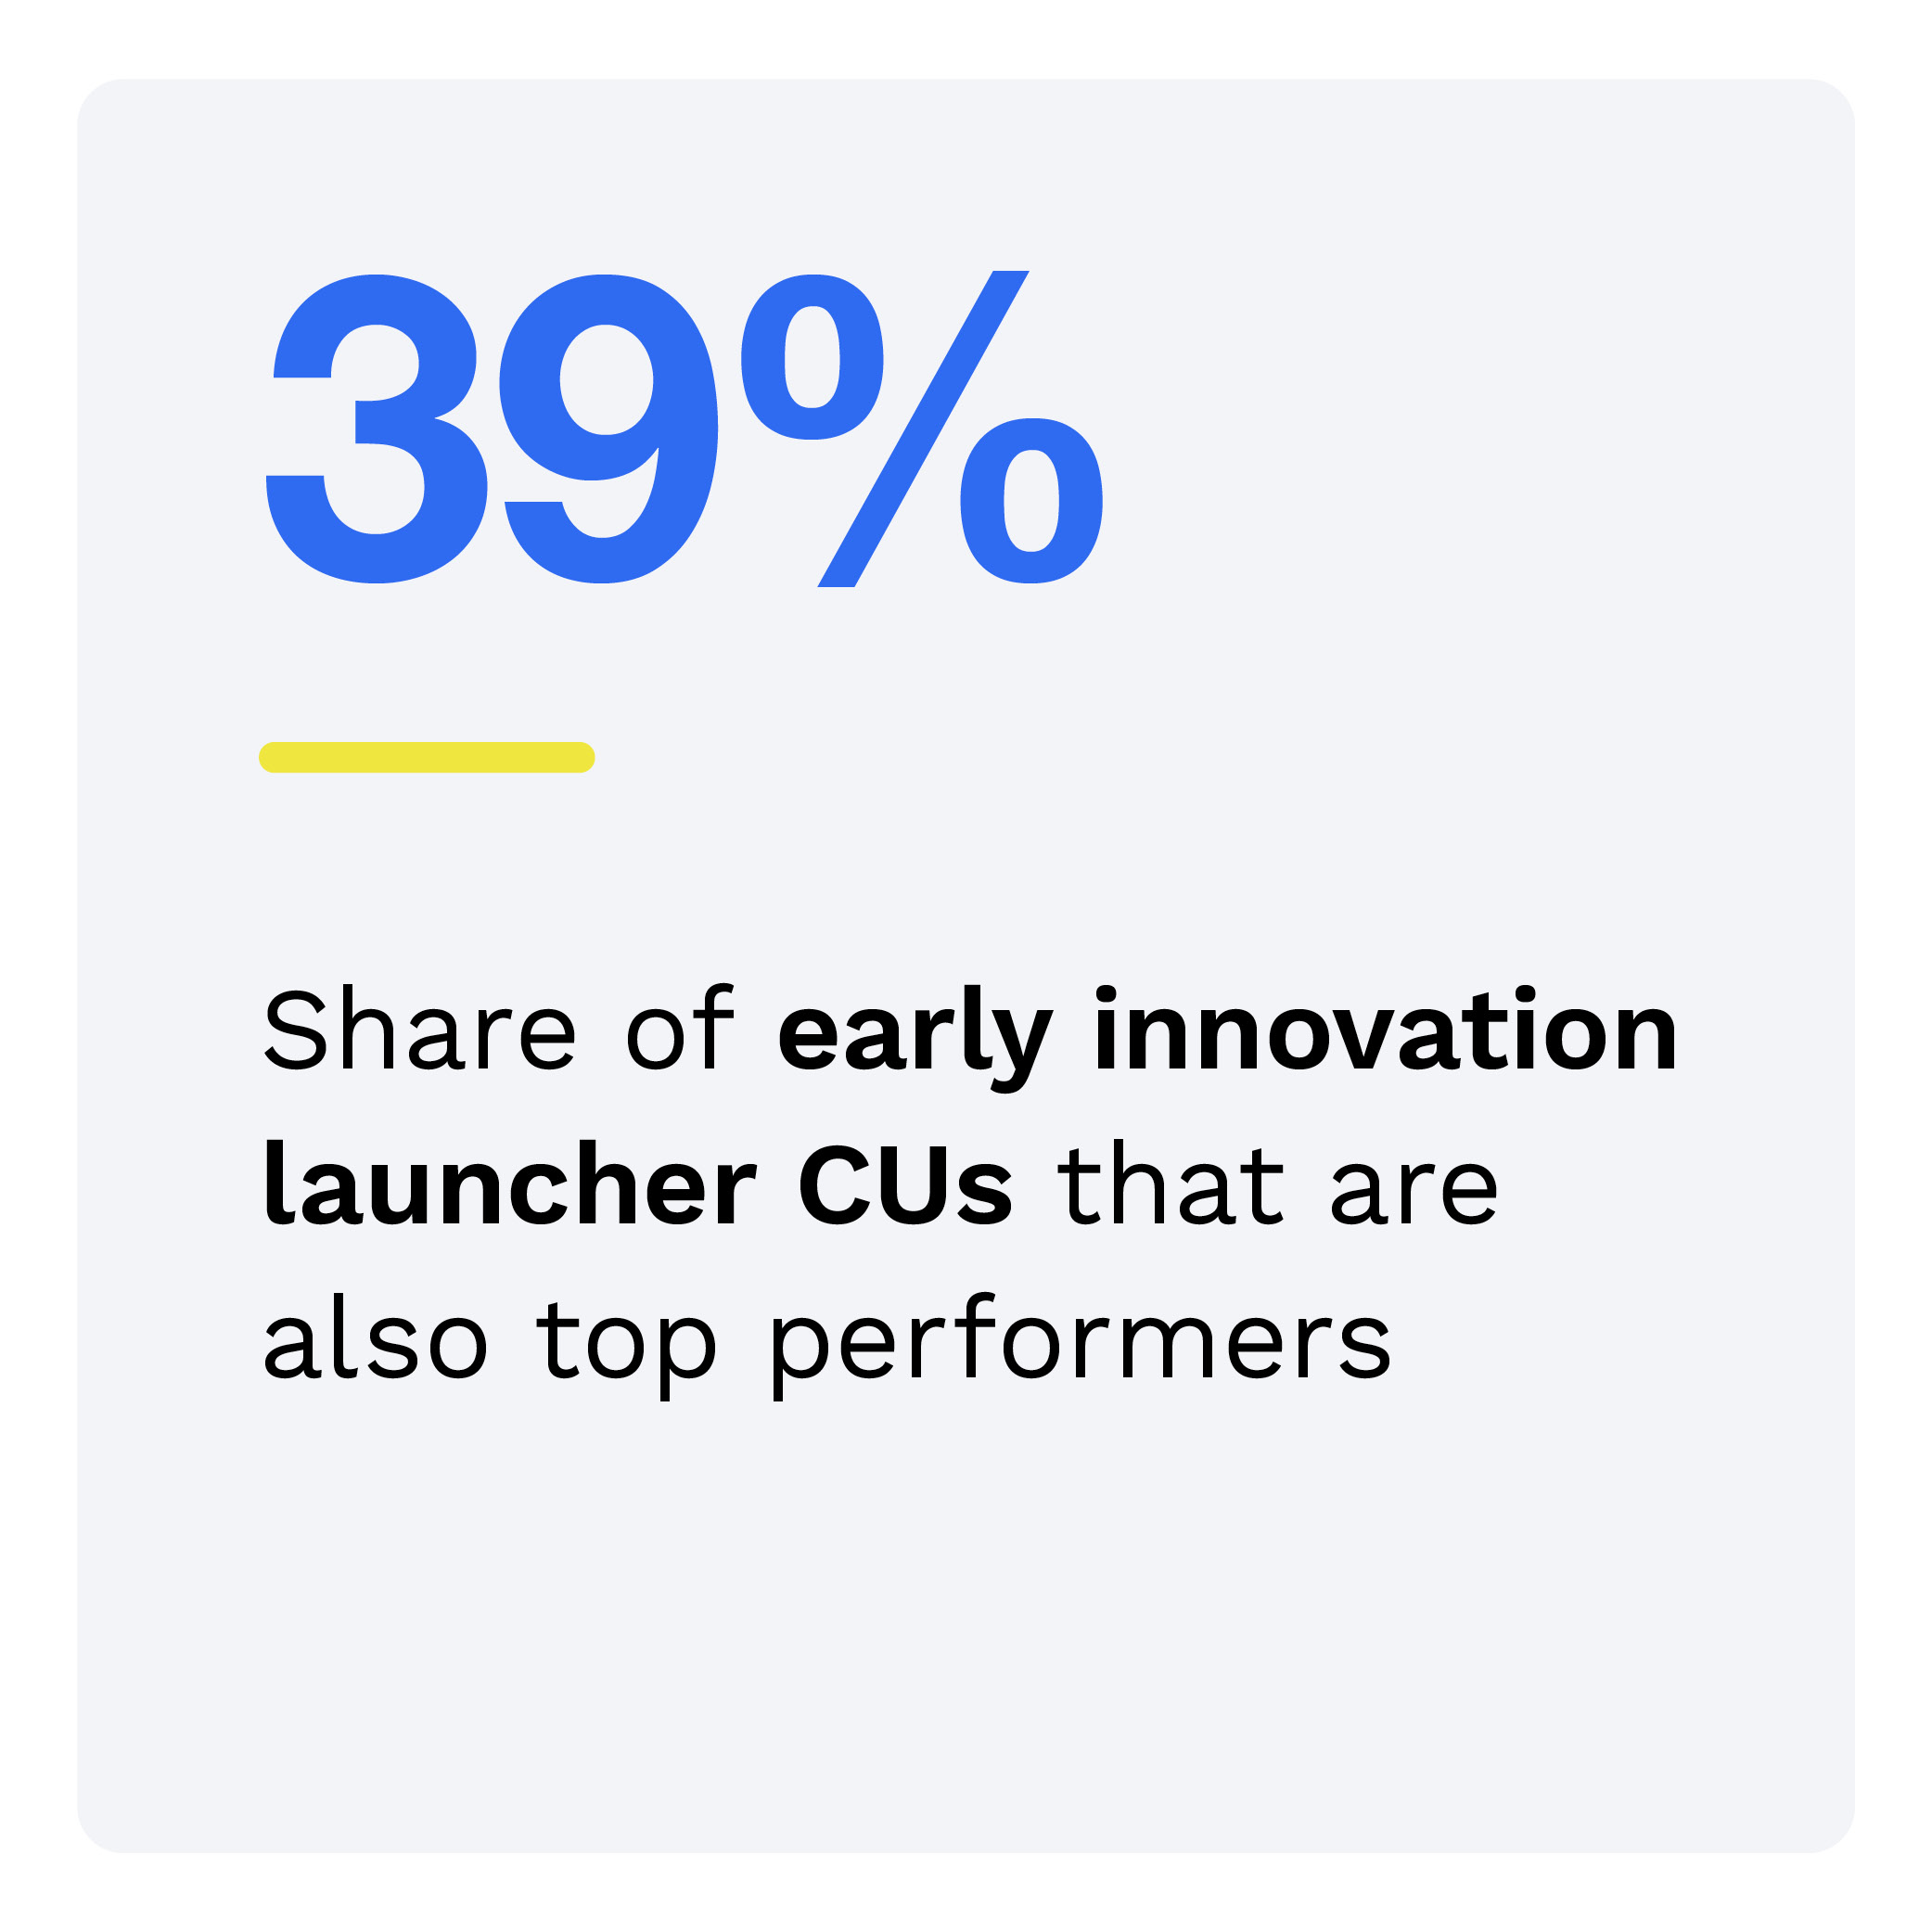 39%: Share of early innovation launcher CUs that are also top performers